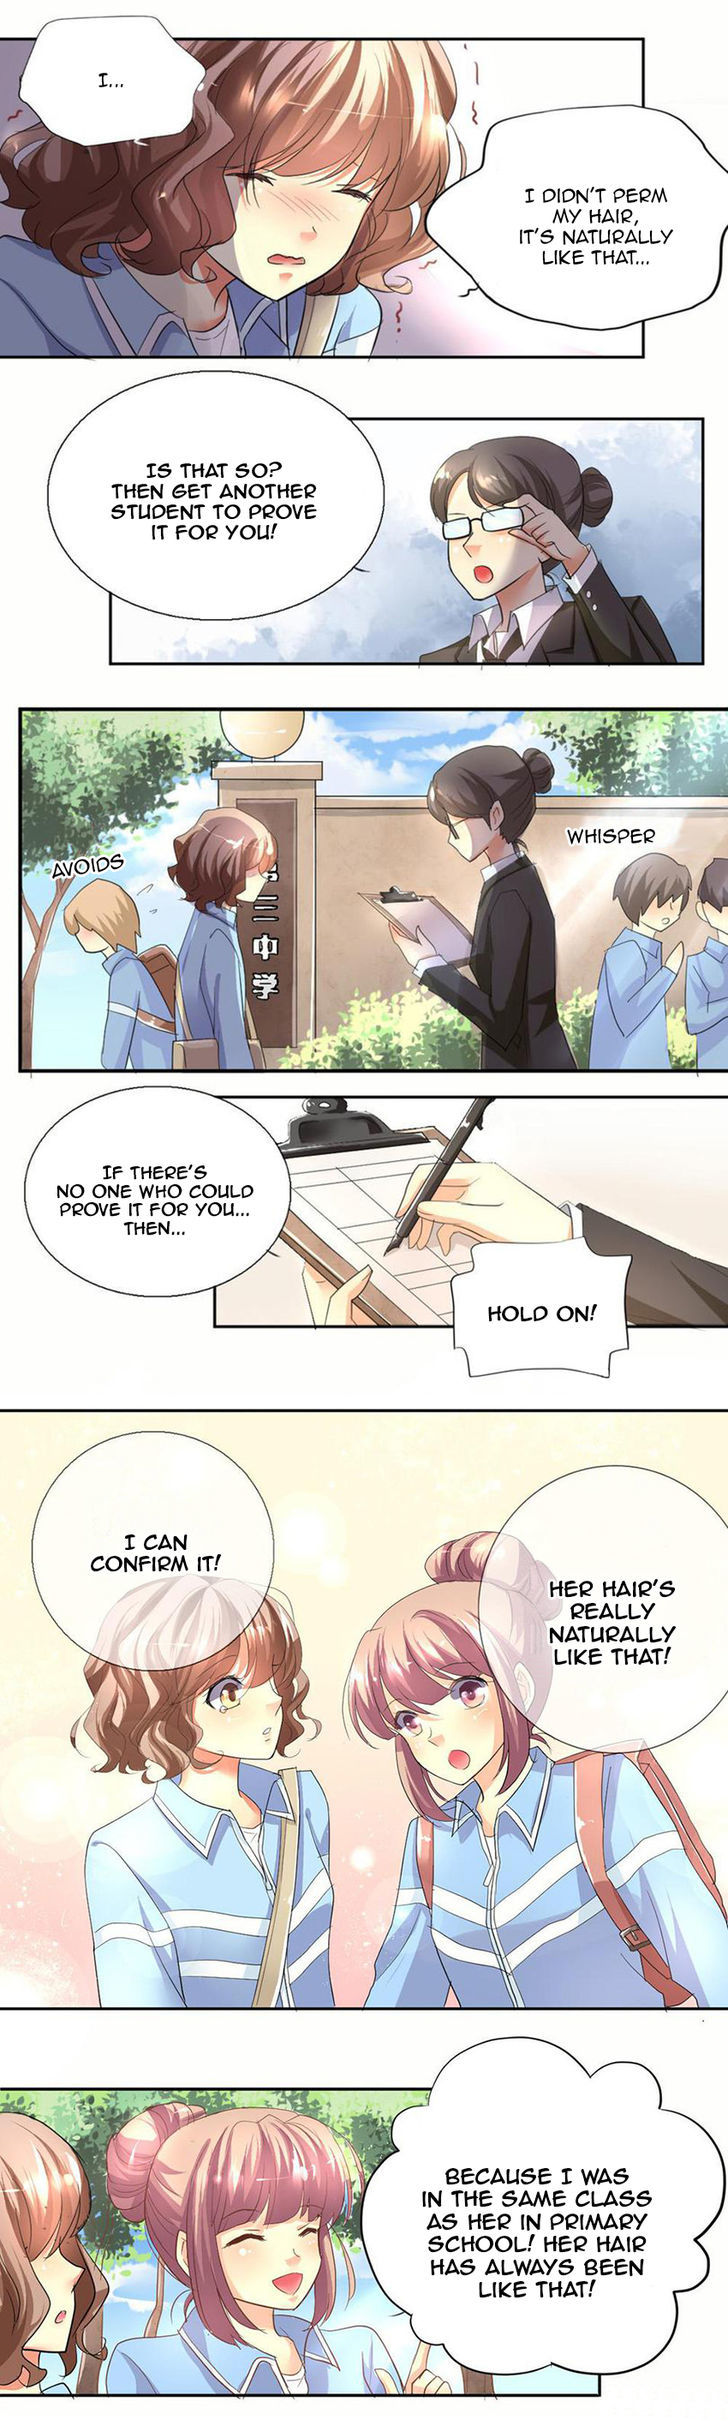 She Who is The Most Special to me - chapter 4 - #4